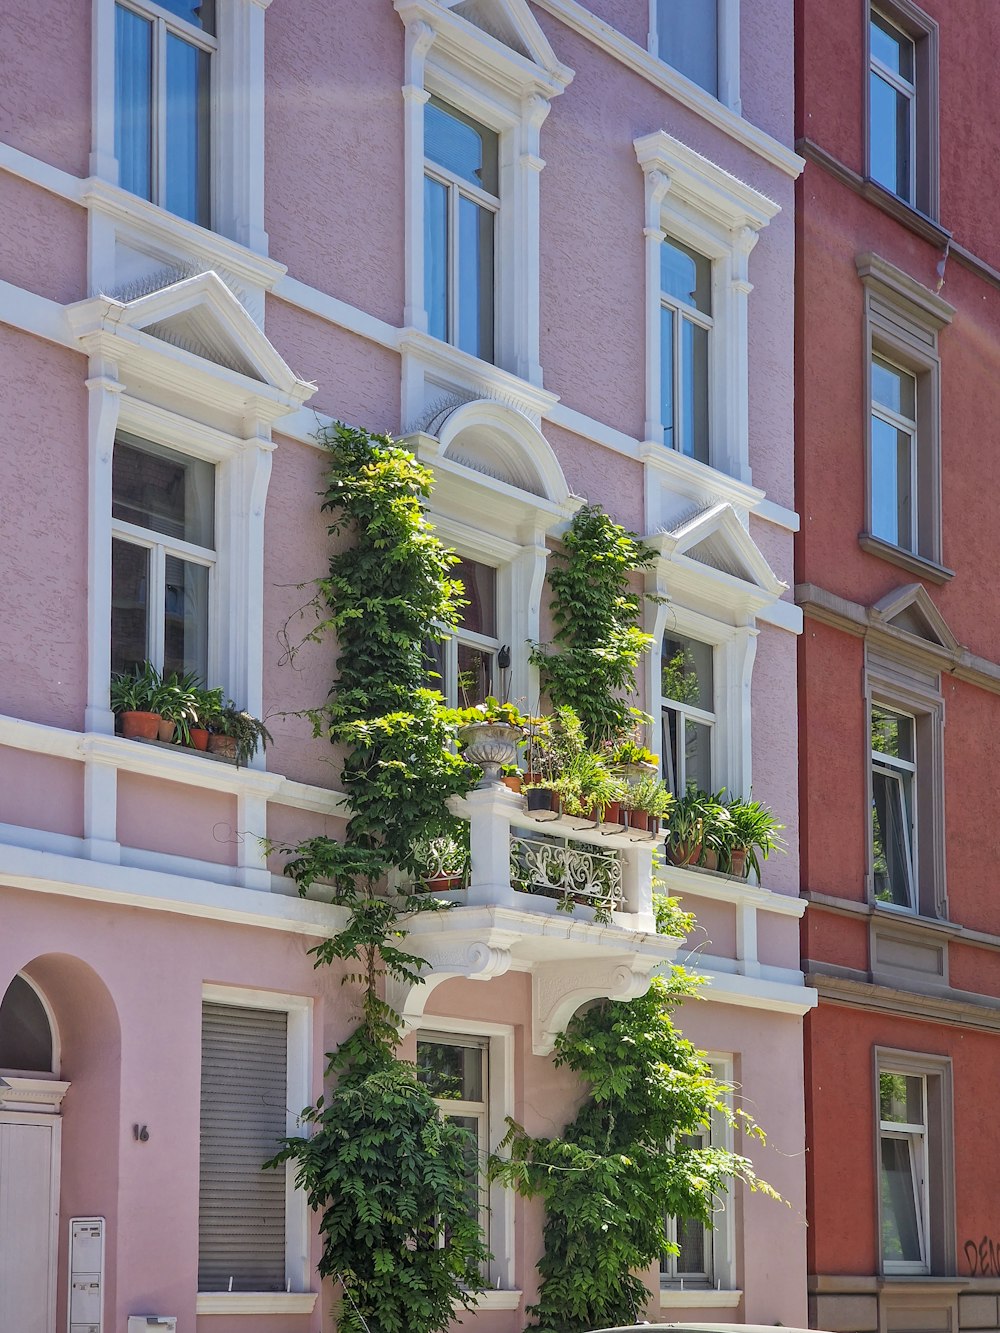 a pink building with many windows and plants growing on it